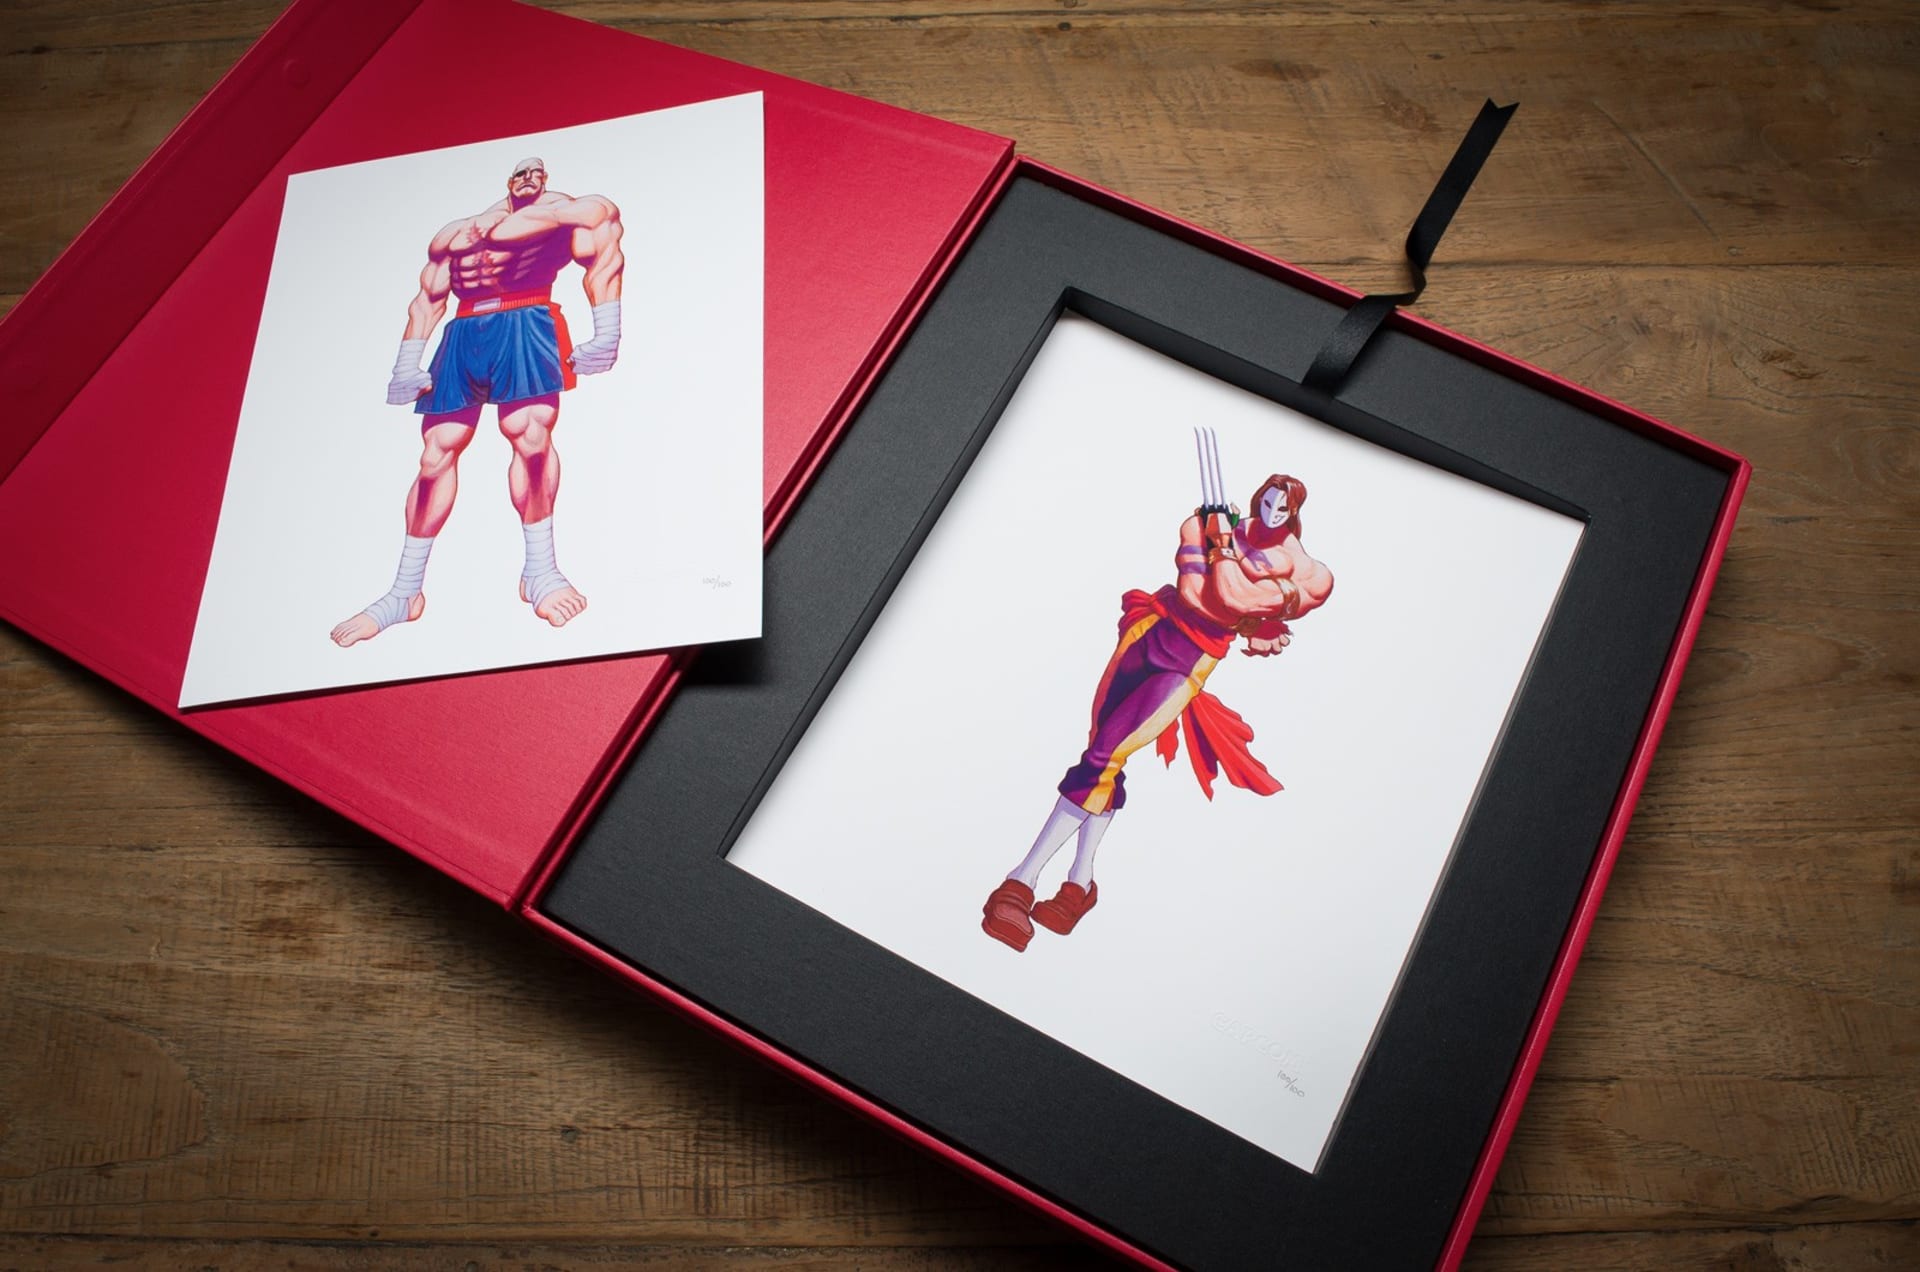 VEGA STREET FIGHTER - Street Fighter - Posters and Art Prints